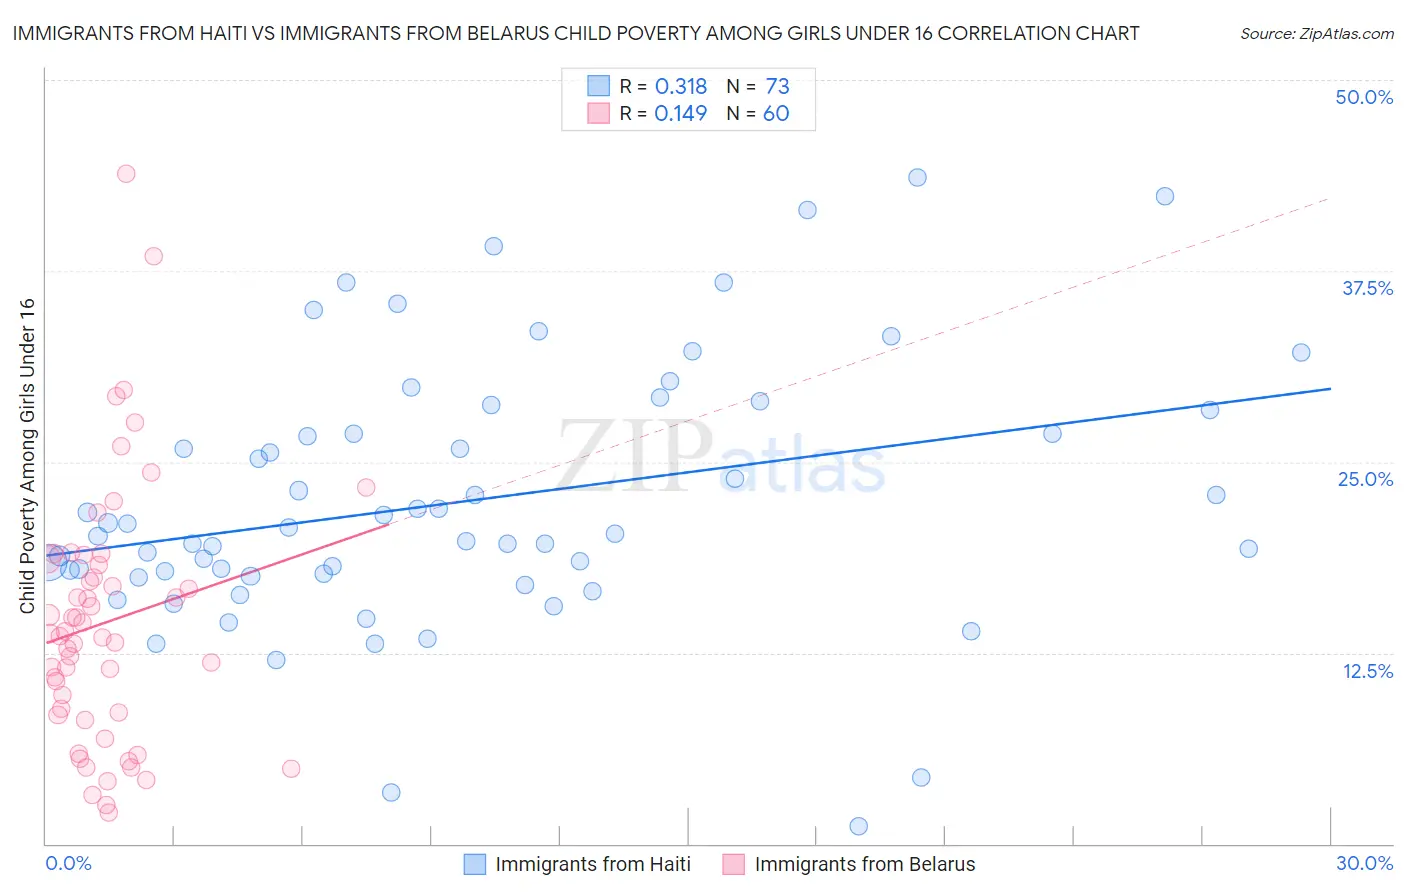 Immigrants from Haiti vs Immigrants from Belarus Child Poverty Among Girls Under 16